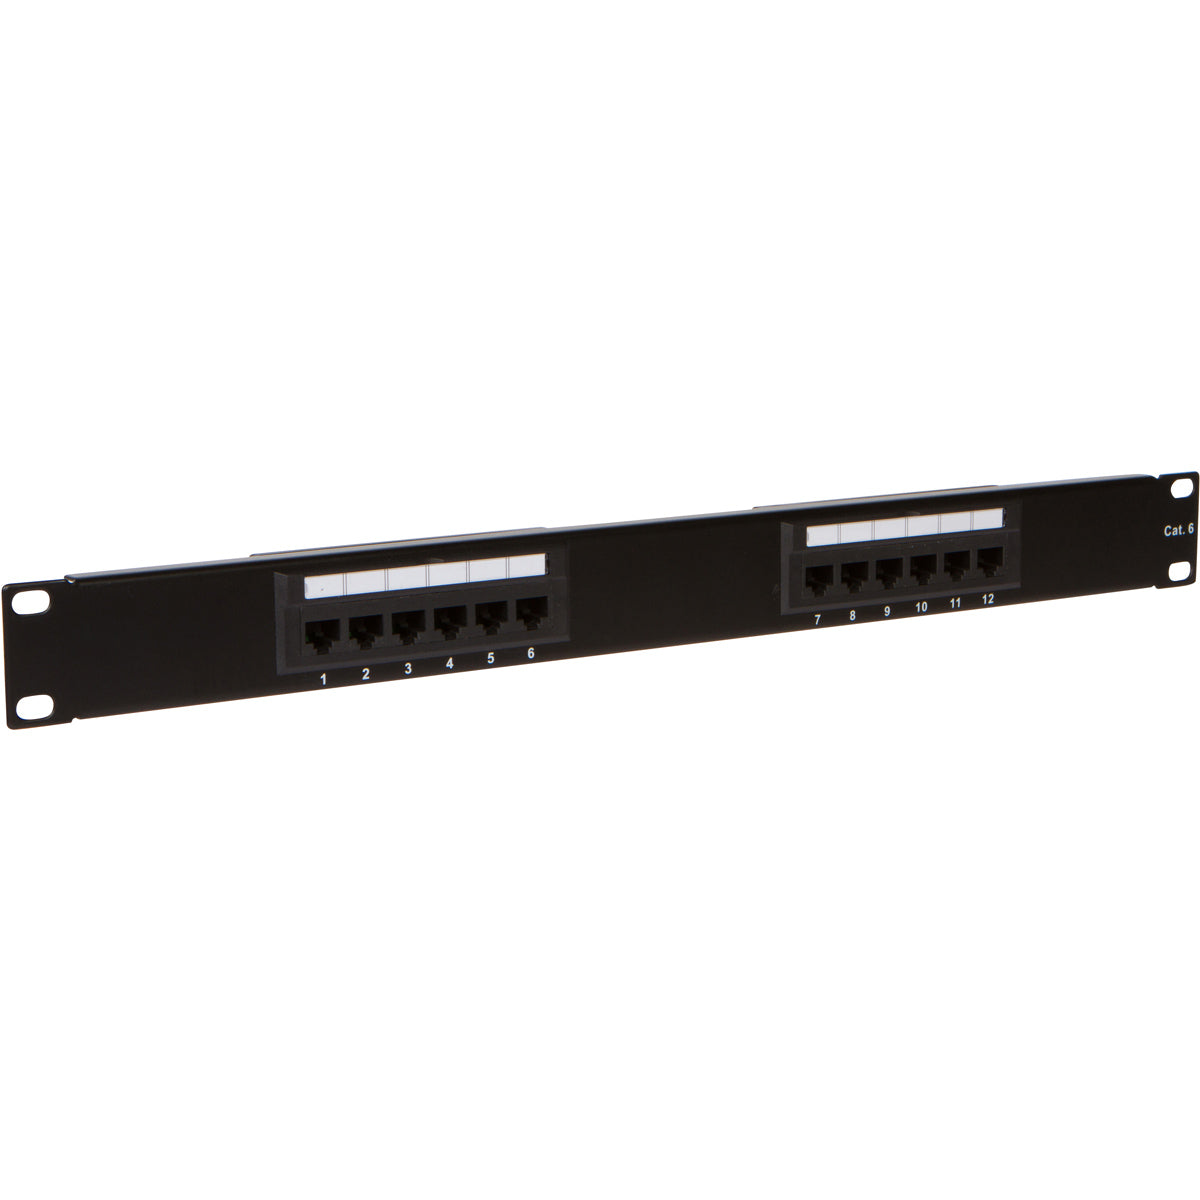 12 Port Cat6 Patch Panel with Punch Down Tool and Cable Management System (1, 12 Port) - Milena International Inc